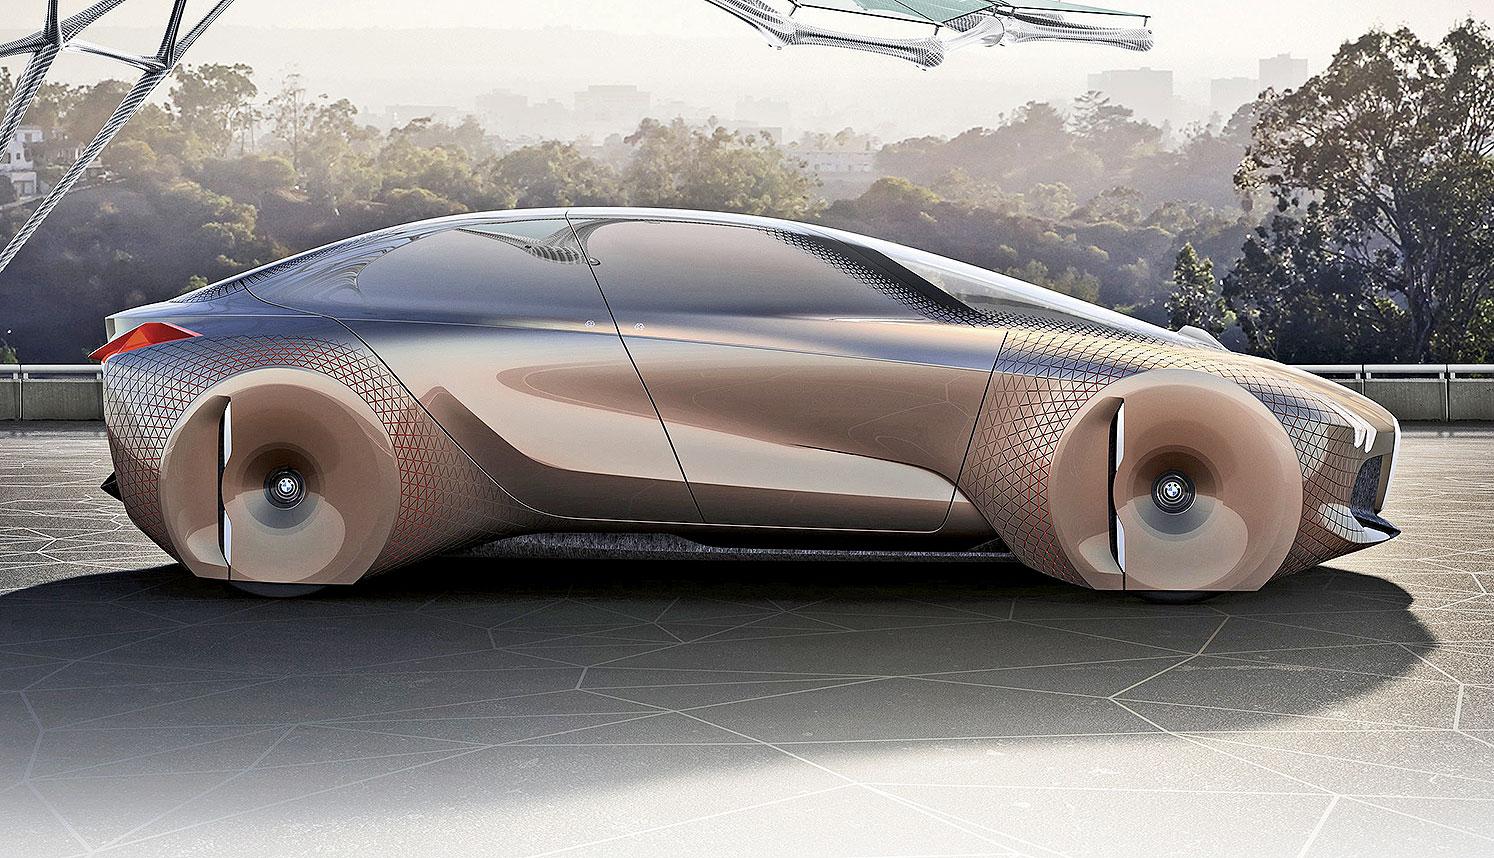 BMW shares its vision